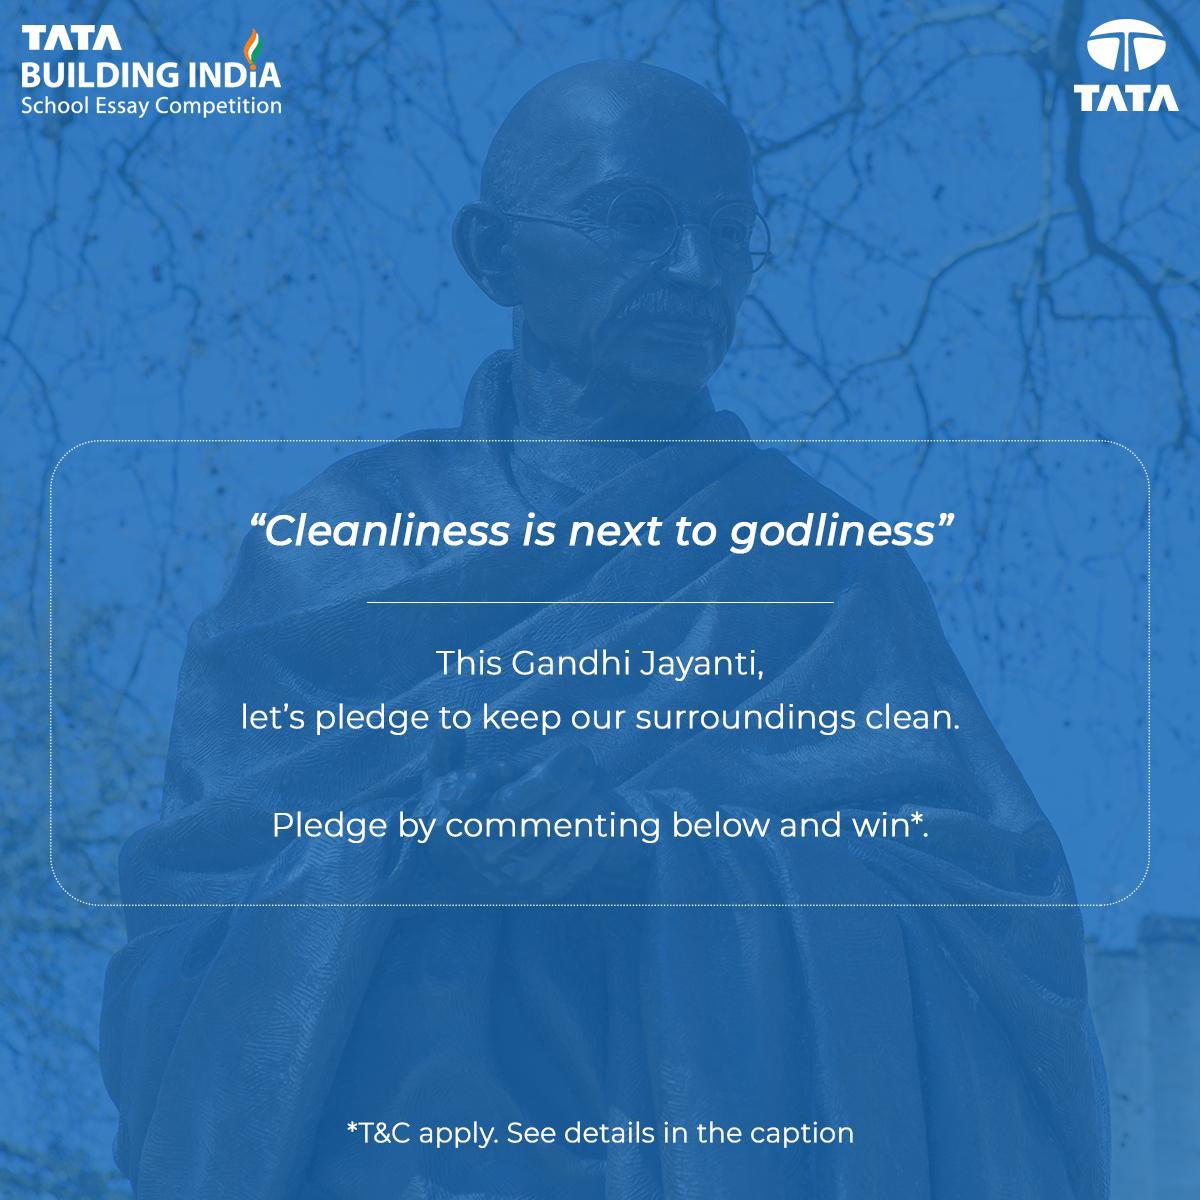 On this Gandhi Jayanti, let’s follow the path of the Mahatma and pledge to be conscious caretakers of our surroundings.
#GandhiJayanti #Environment #Cleanliness #SwacchBharat #GreenPledge #SustainableLiving #EcoWarriors #PlanetProtectors #GandhiInspired #tatabuildingindia